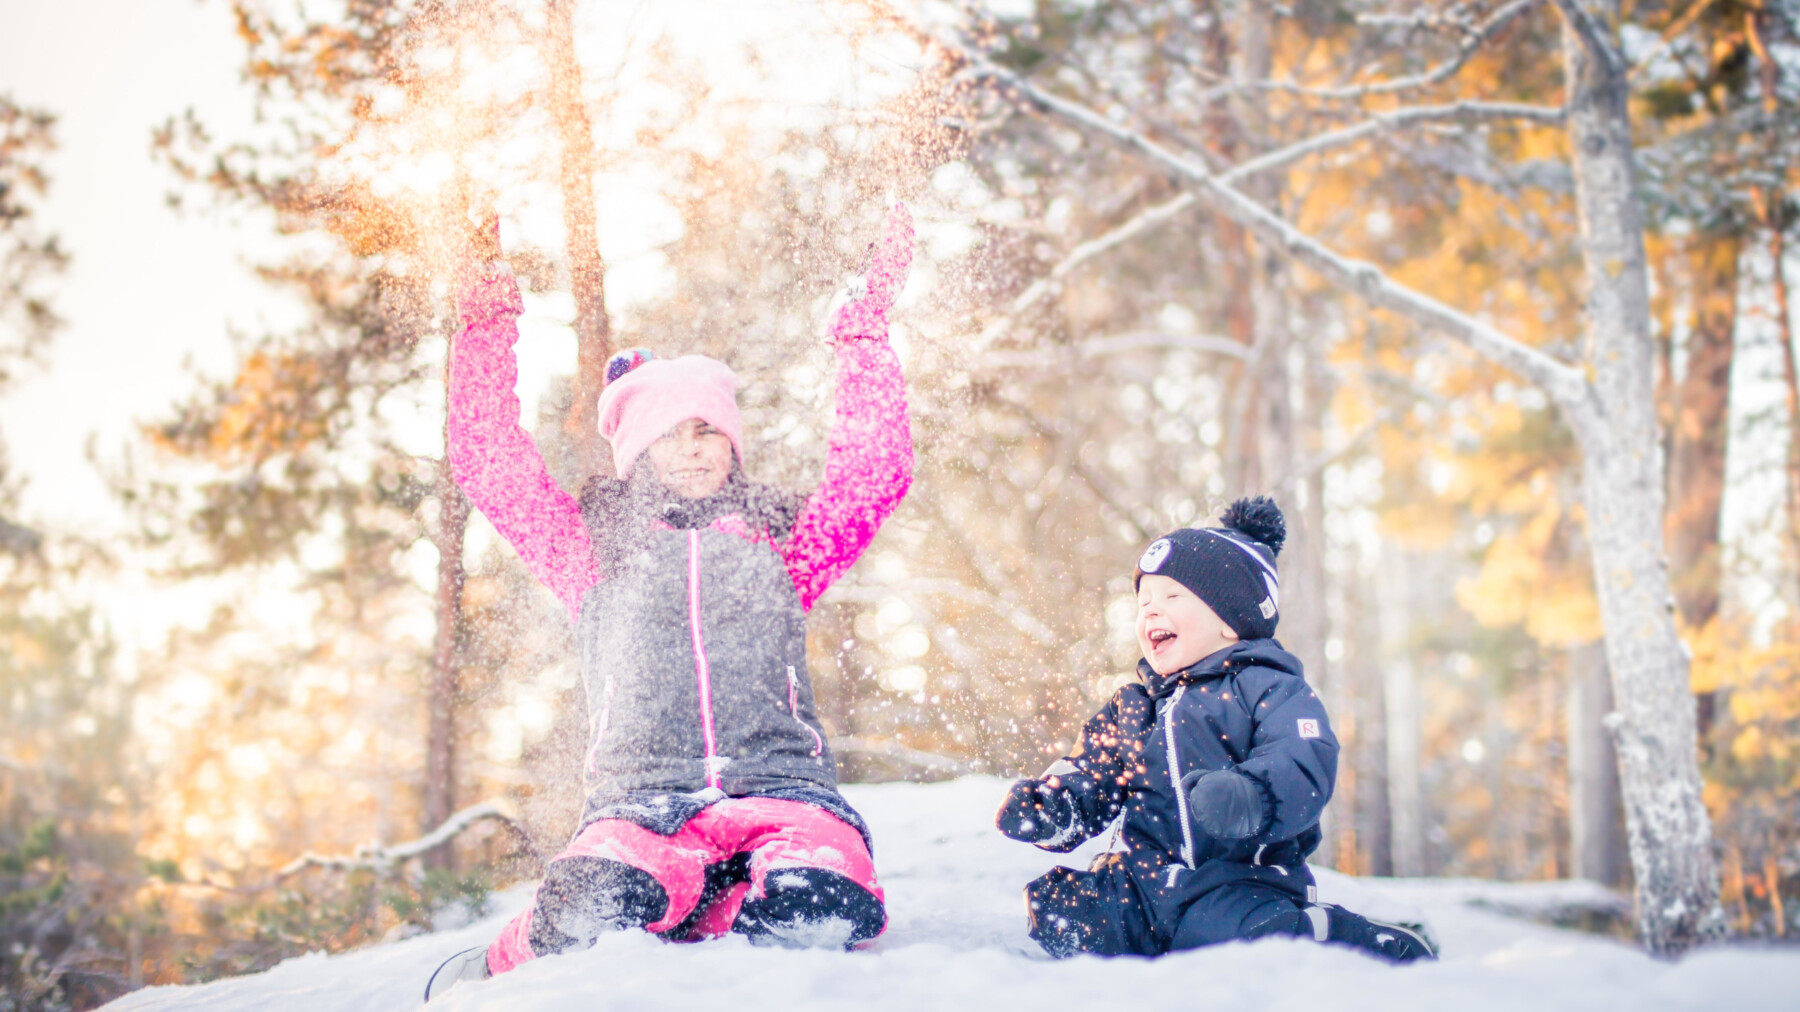 Two small children are throwing snow into the air and laughing in front of several trees.